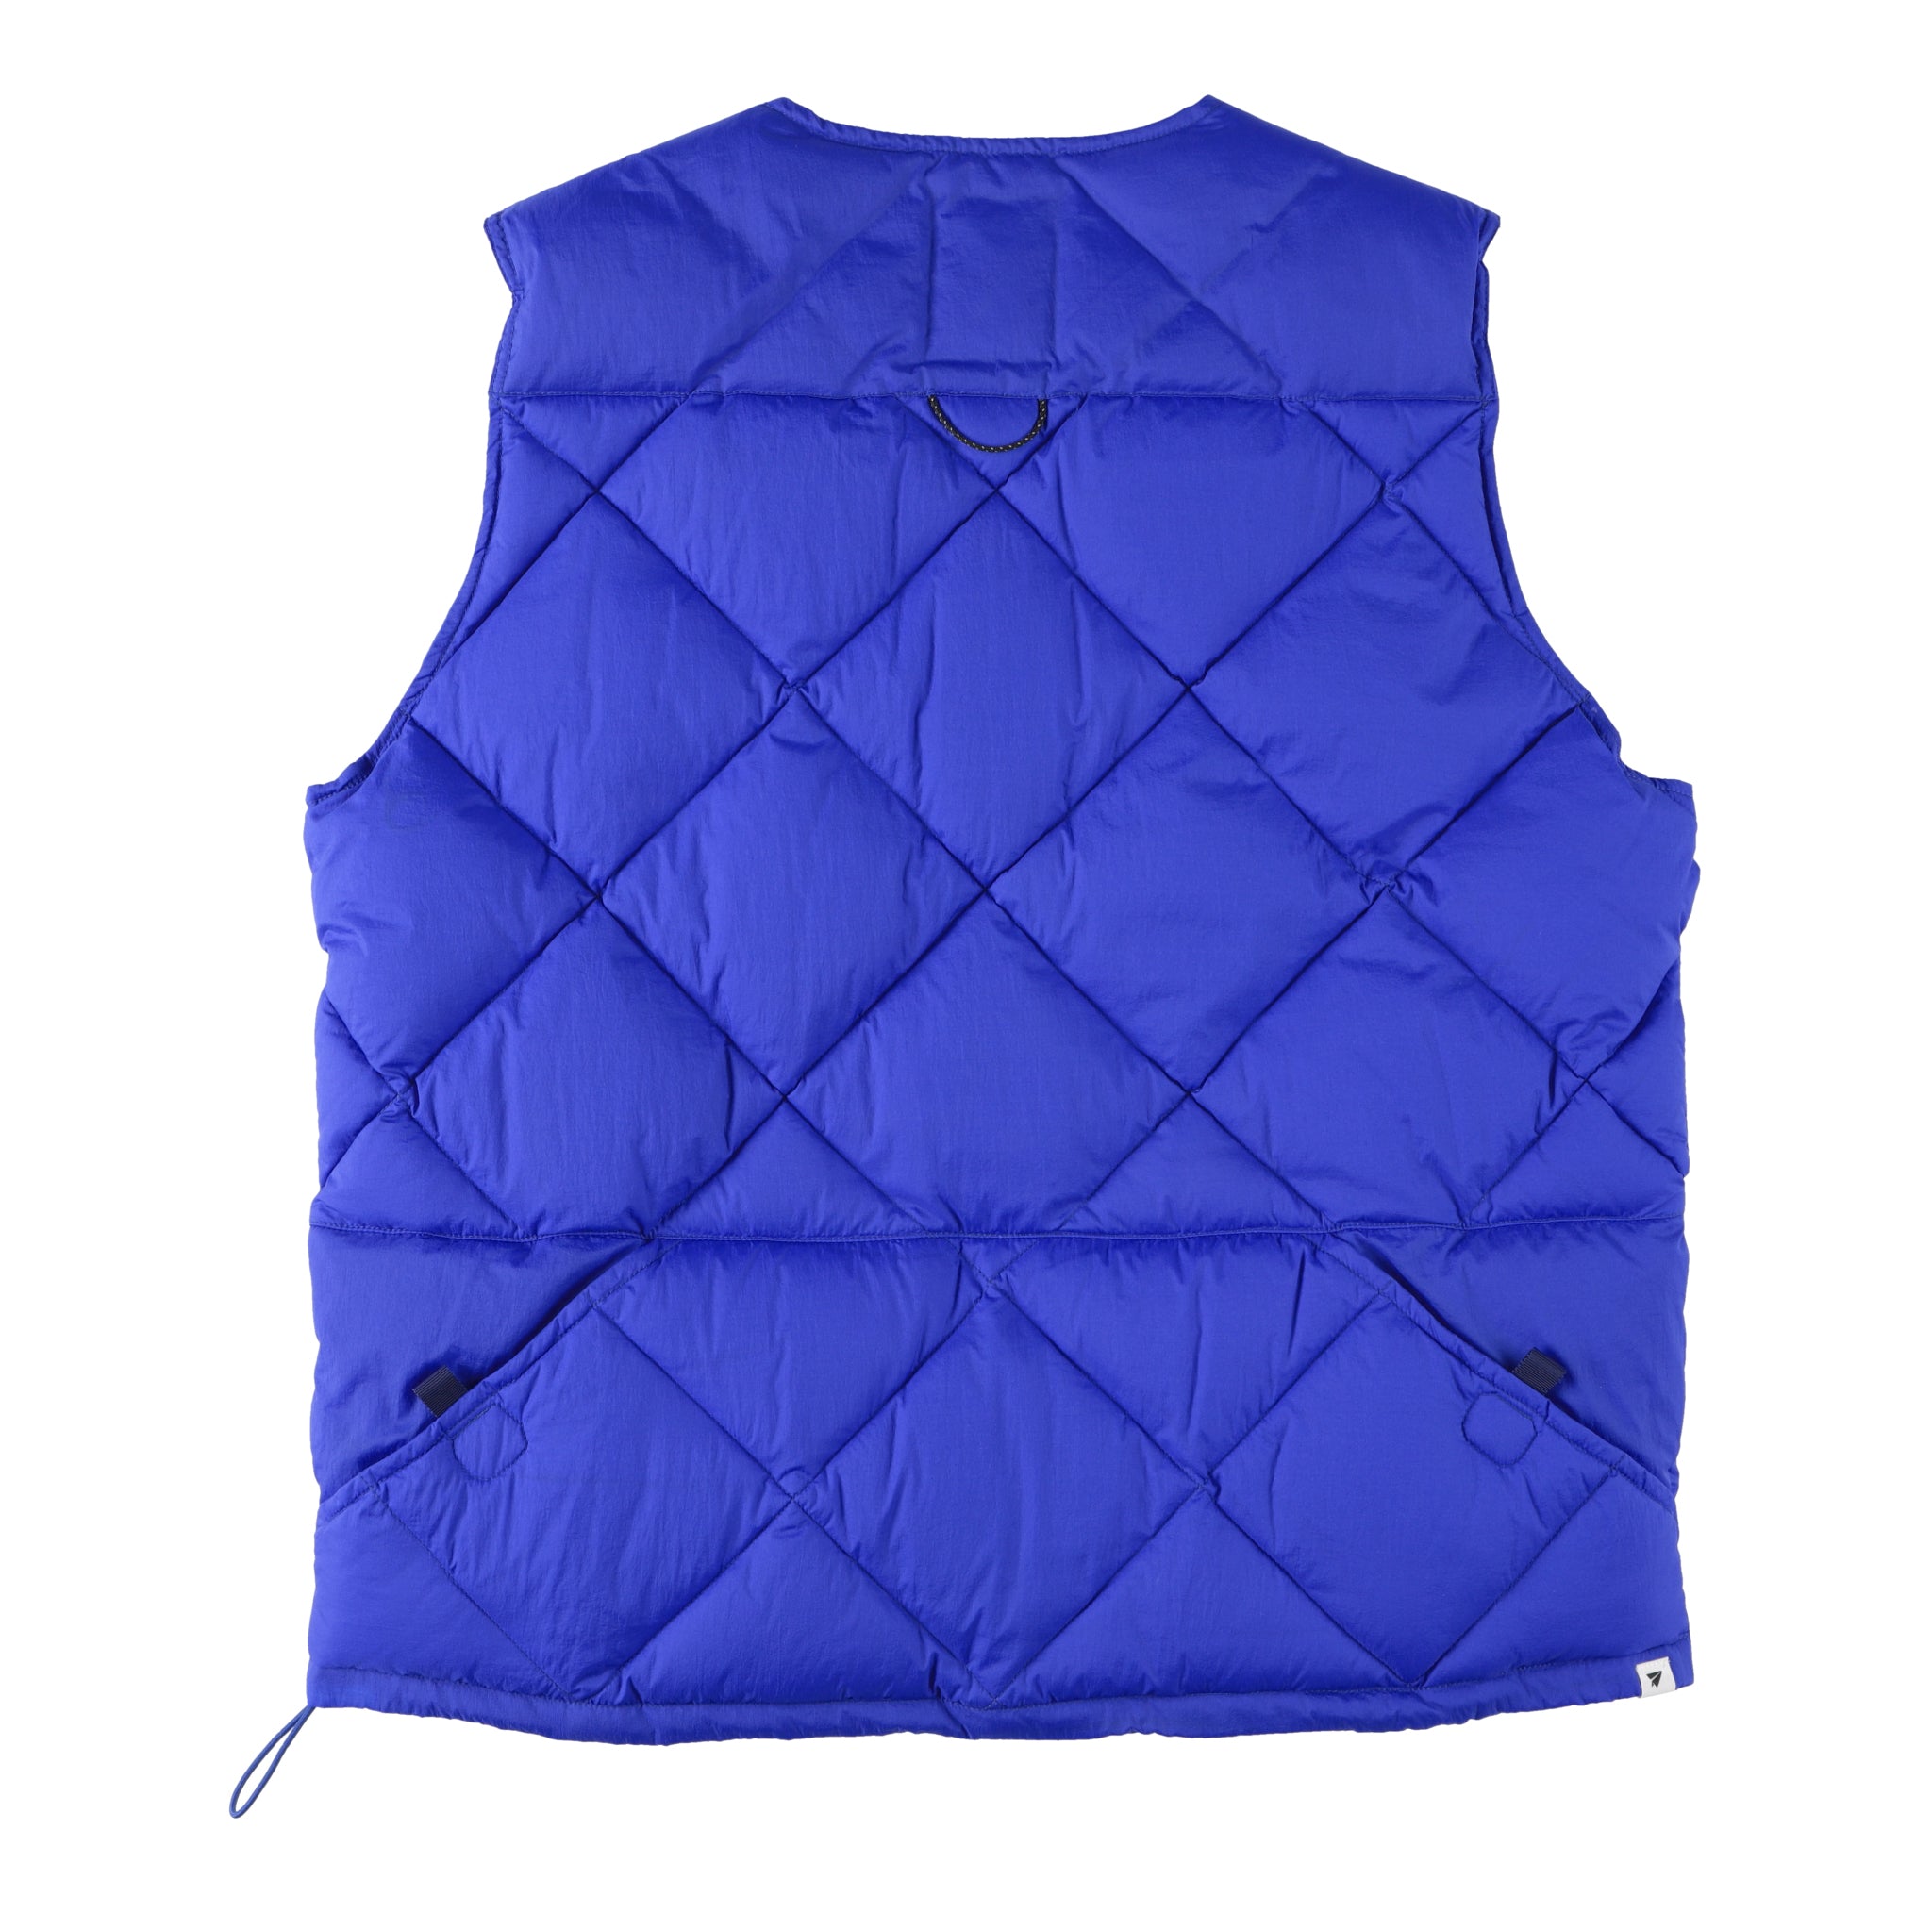 Middle Layer Down Vest- #79 (Blue) – PAPERSKY WEAR STORE